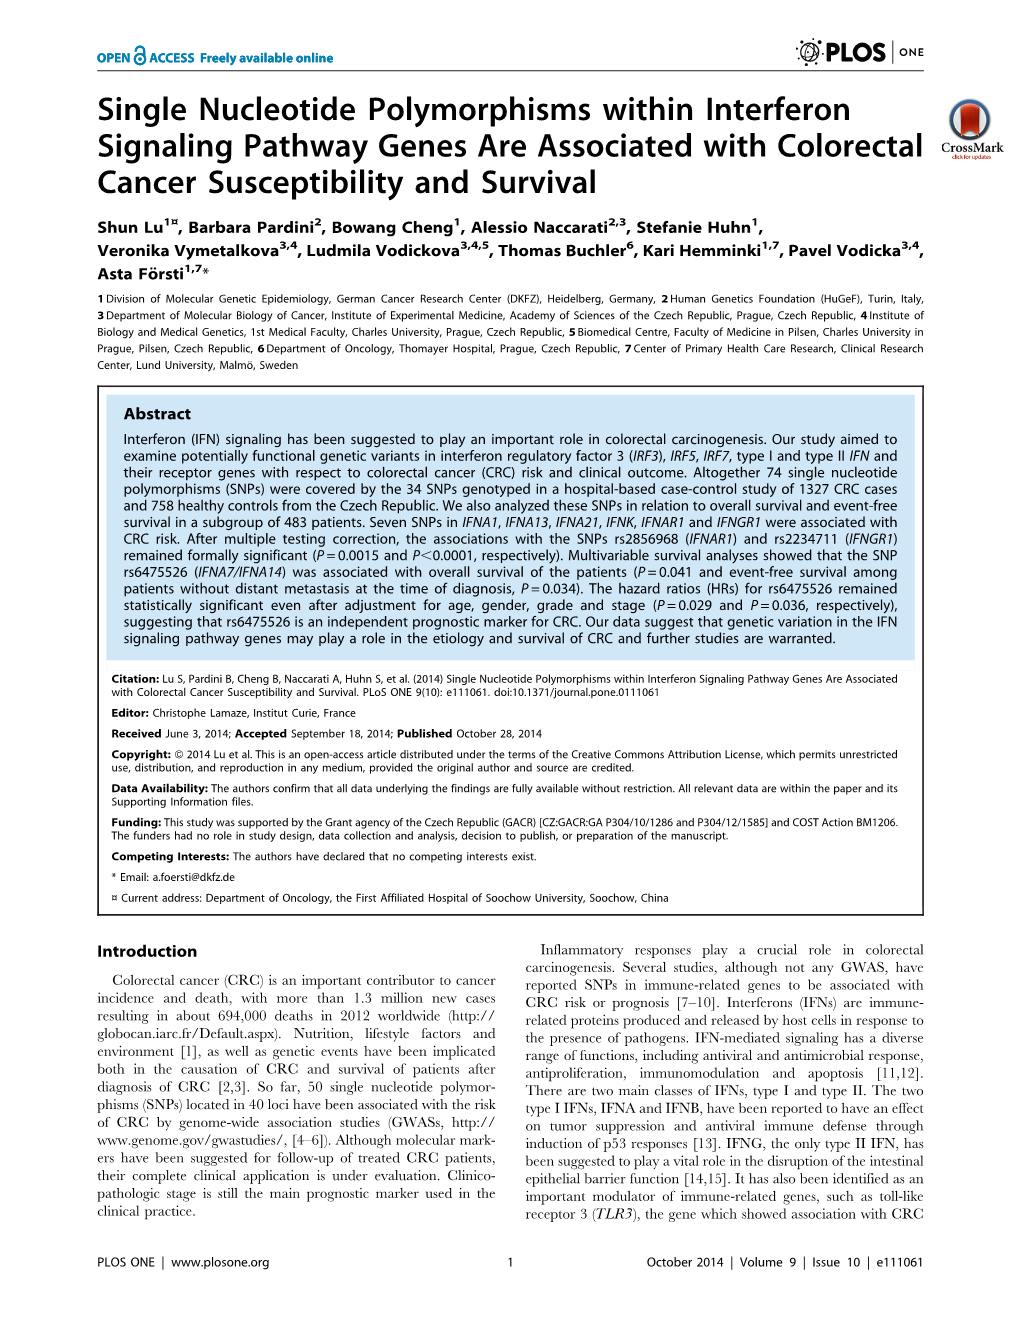 Single Nucleotide Polymorphisms Within Interferon Signaling Pathway Genes Are Associated with Colorectal Cancer Susceptibility and Survival